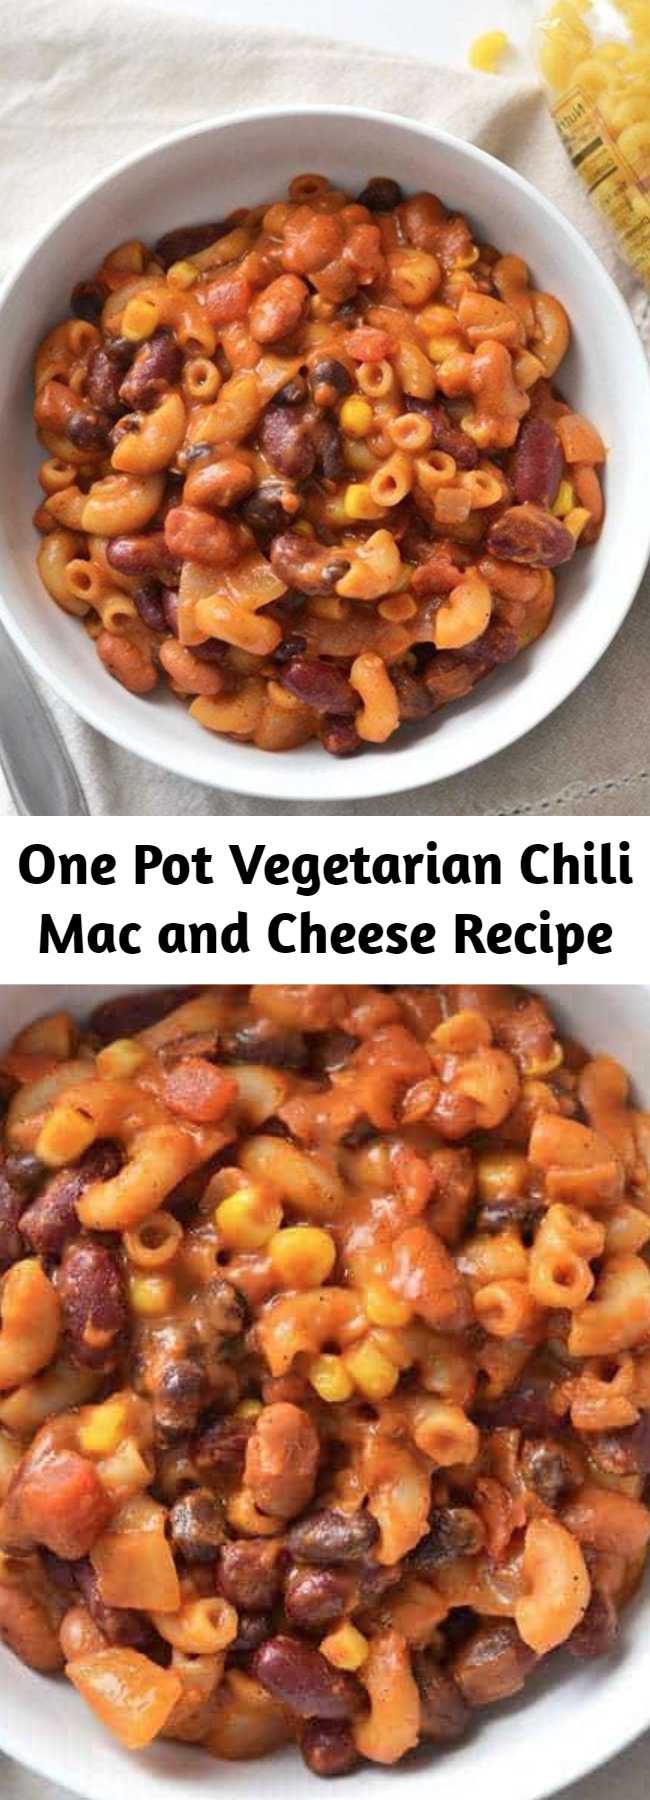 One Pot Vegetarian Chili Mac and Cheese Recipe - This rich and comforting One Pot Vegetarian Chili Mac and Cheese is the perfect quick and easy weeknight meal. Works great for meal prep!